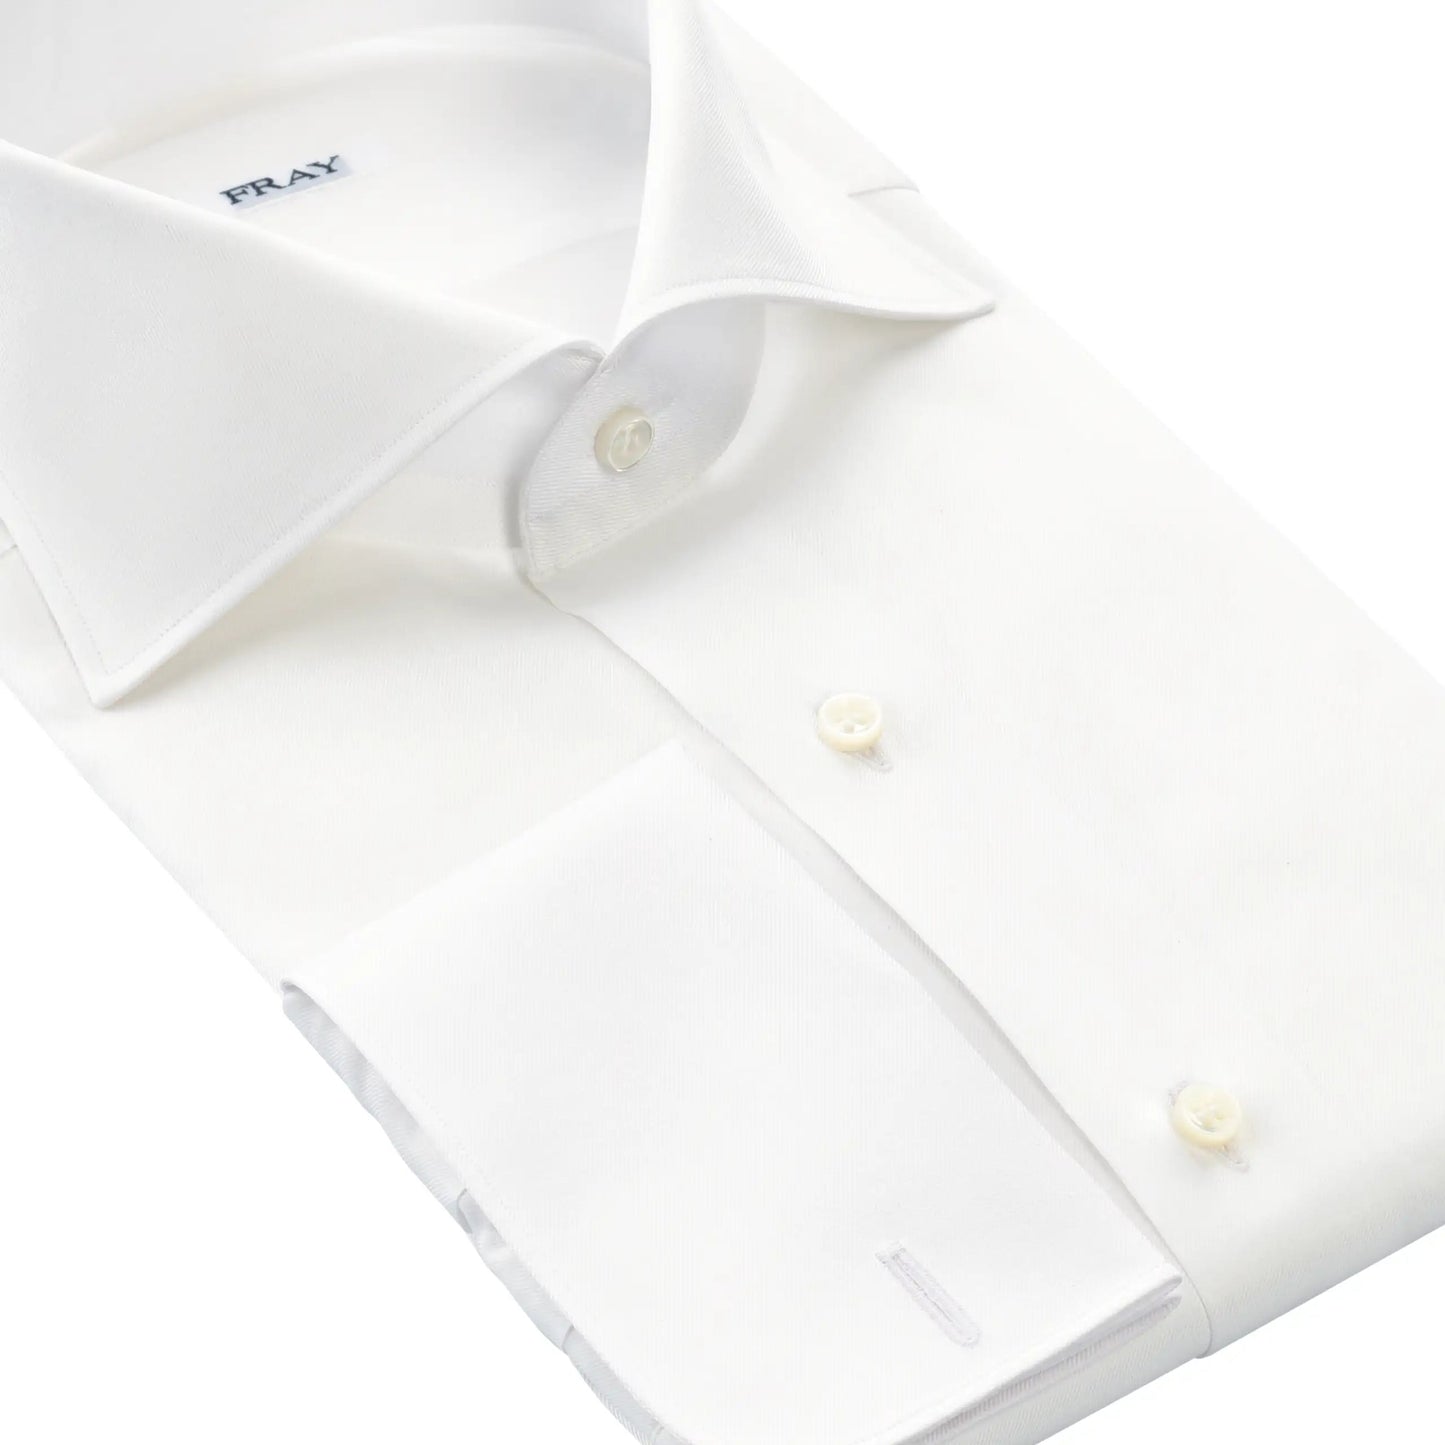 Fray Classic White Shirt with French Double Cuff - SARTALE